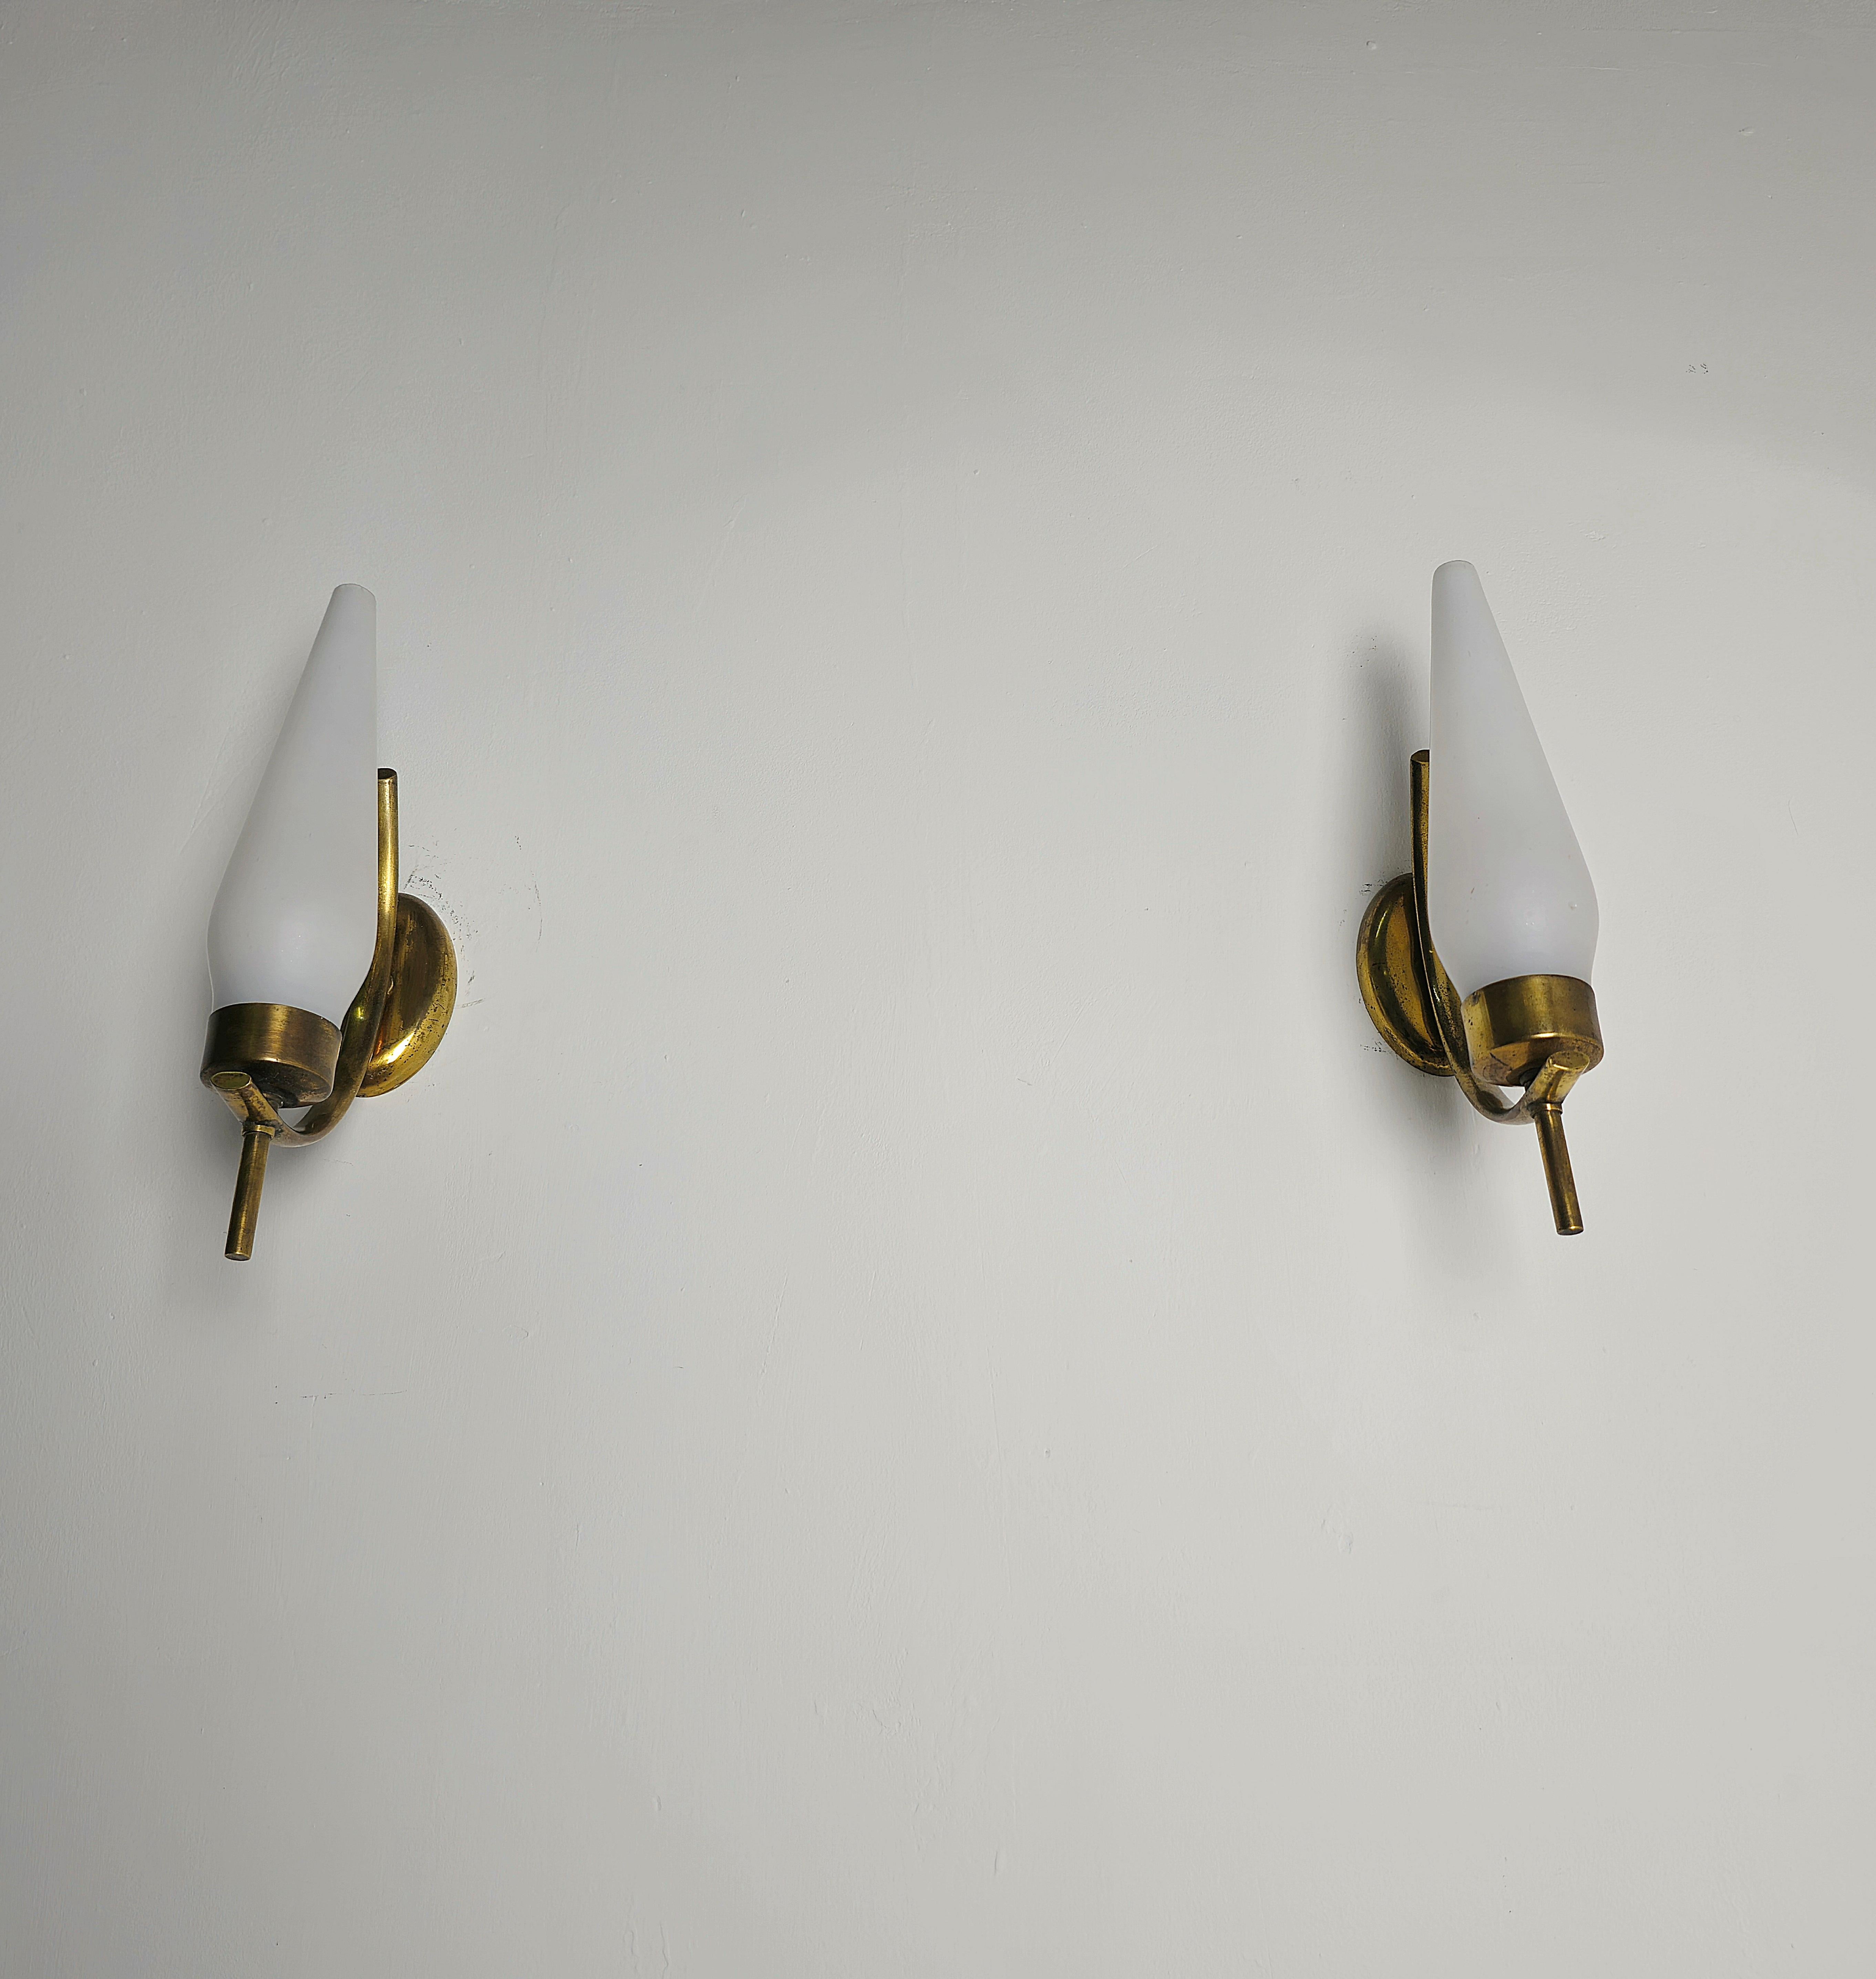 20th Century Pair of Wall Lights Sconces Brass Opaline Glass Midcentury Italian Design 1960s  For Sale